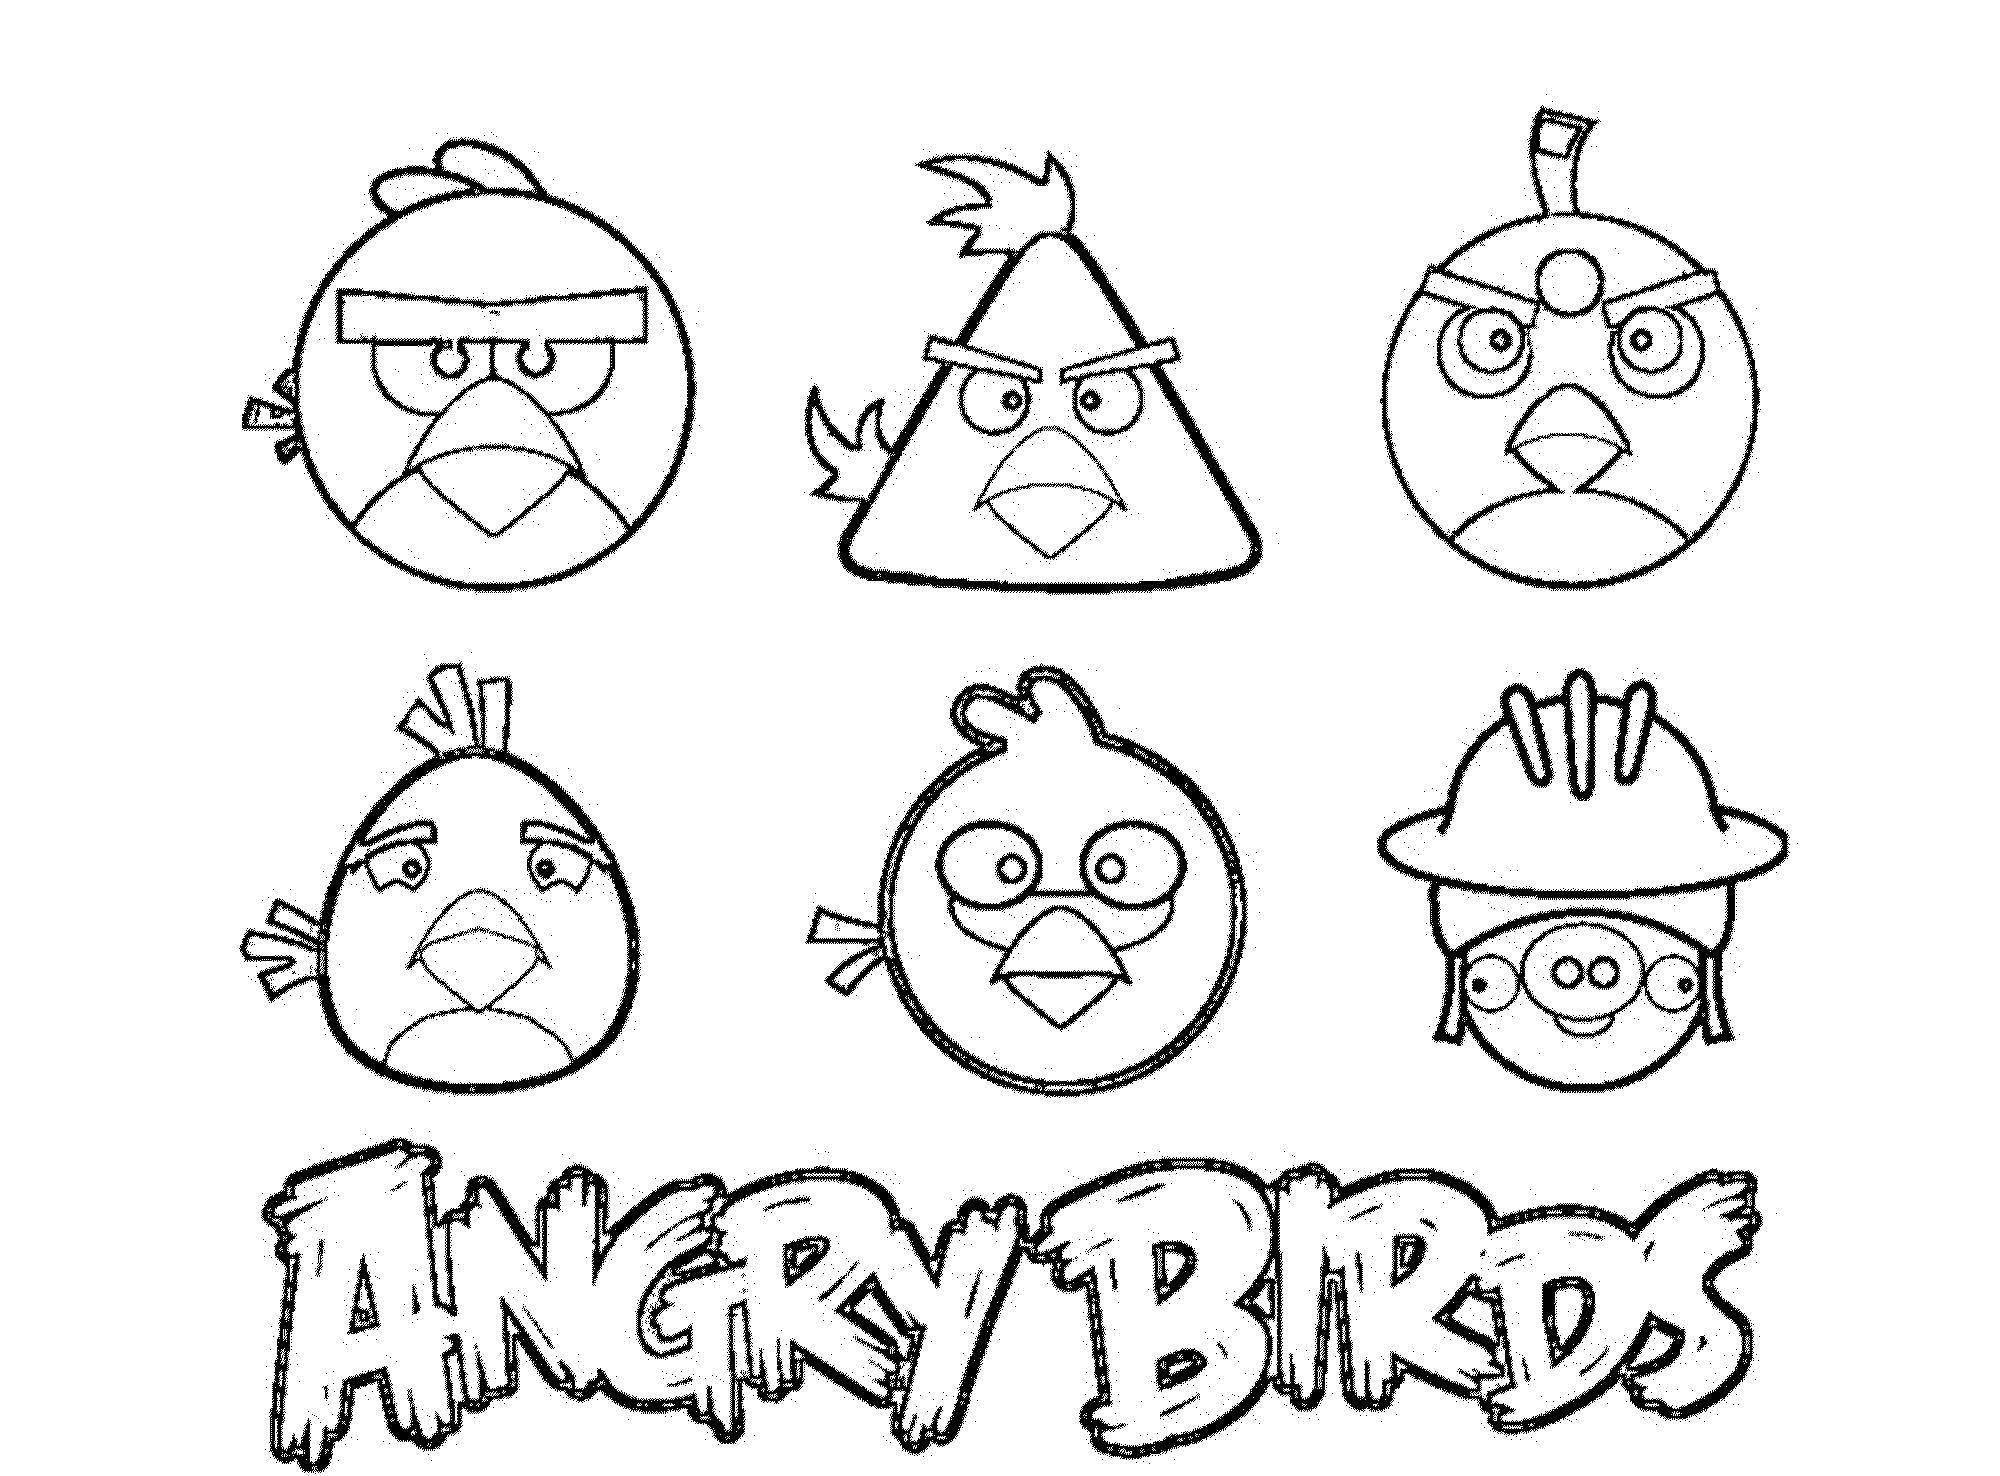 Coloring Angry birds. Category angry birds. Tags:  birds, angry birds, pig.